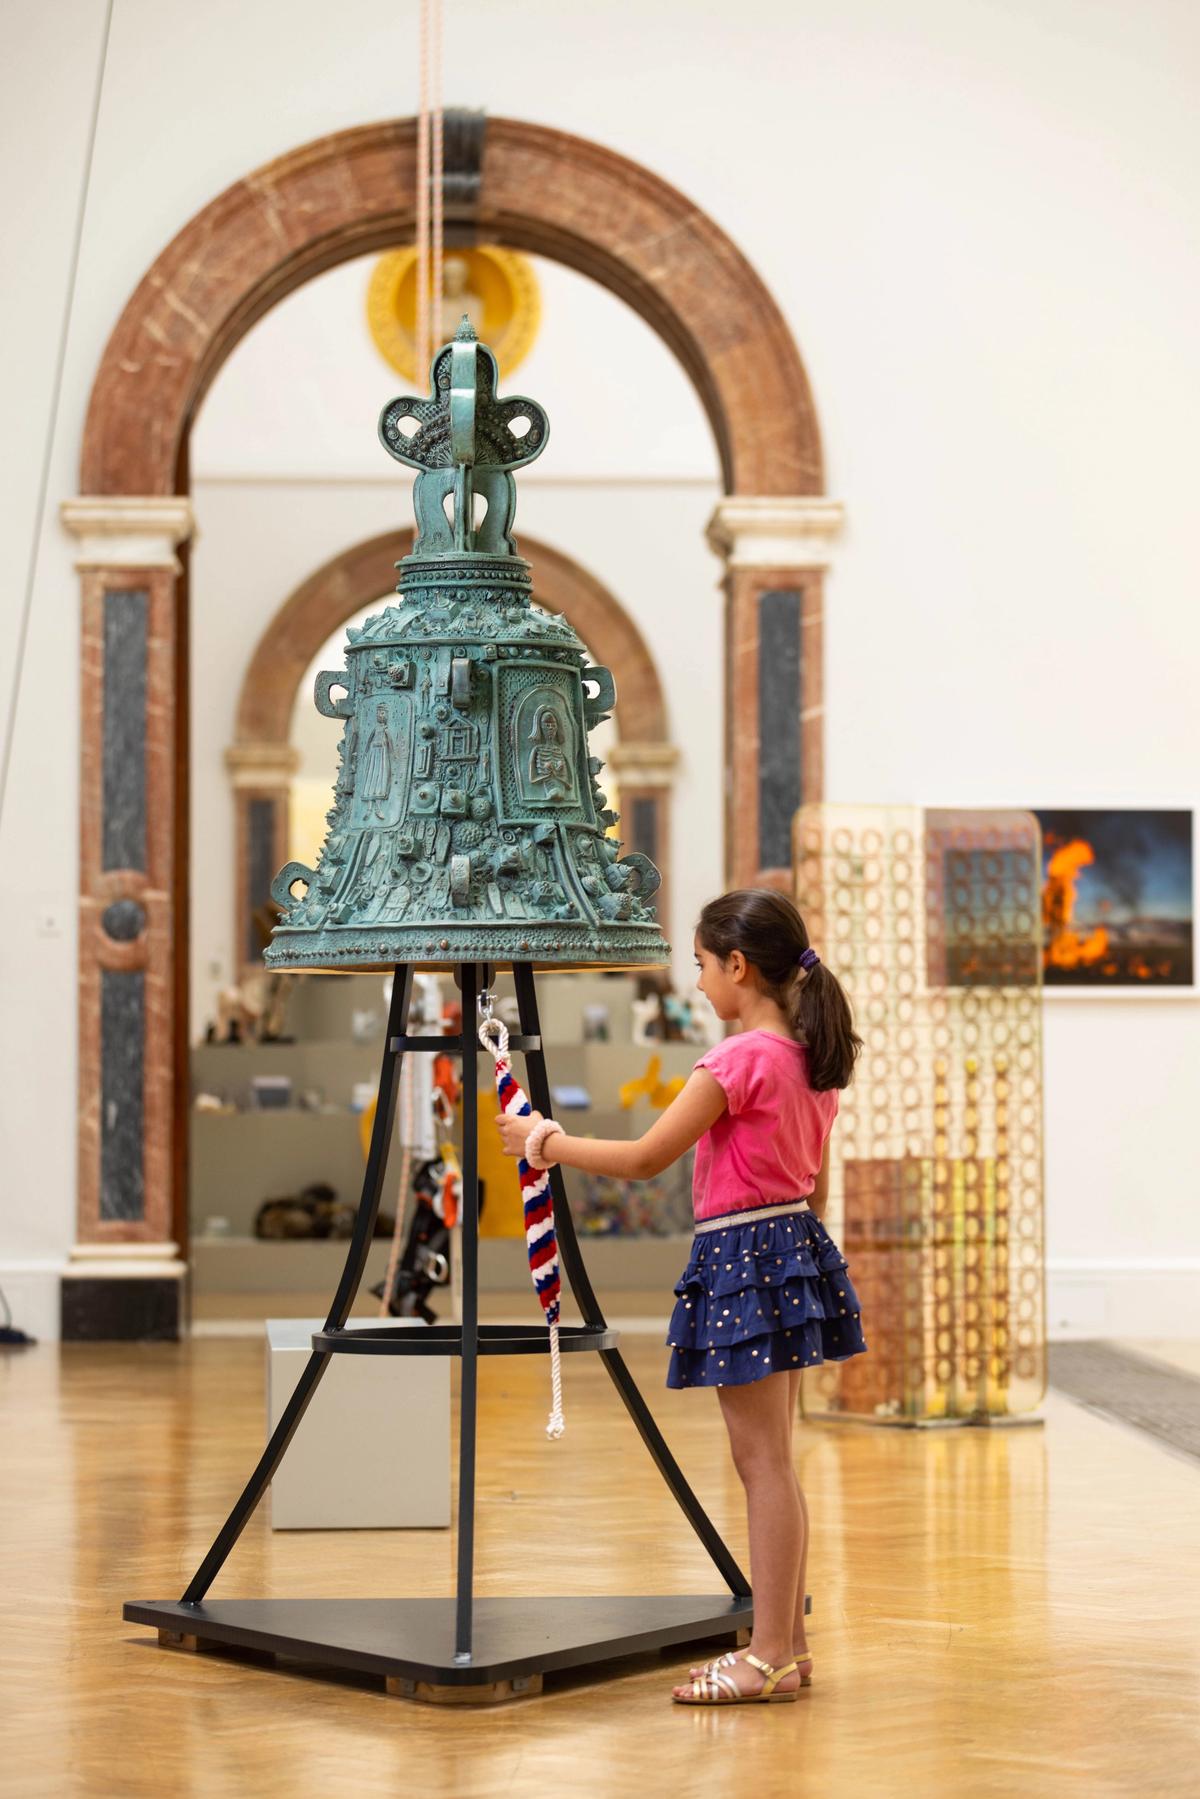 Installation view of Grayson Perry's Covid Bell at the Summer Exhibition 2022 at the Royal Academy of Arts in London Photo: © Royal Academy of Arts, London / David Parry